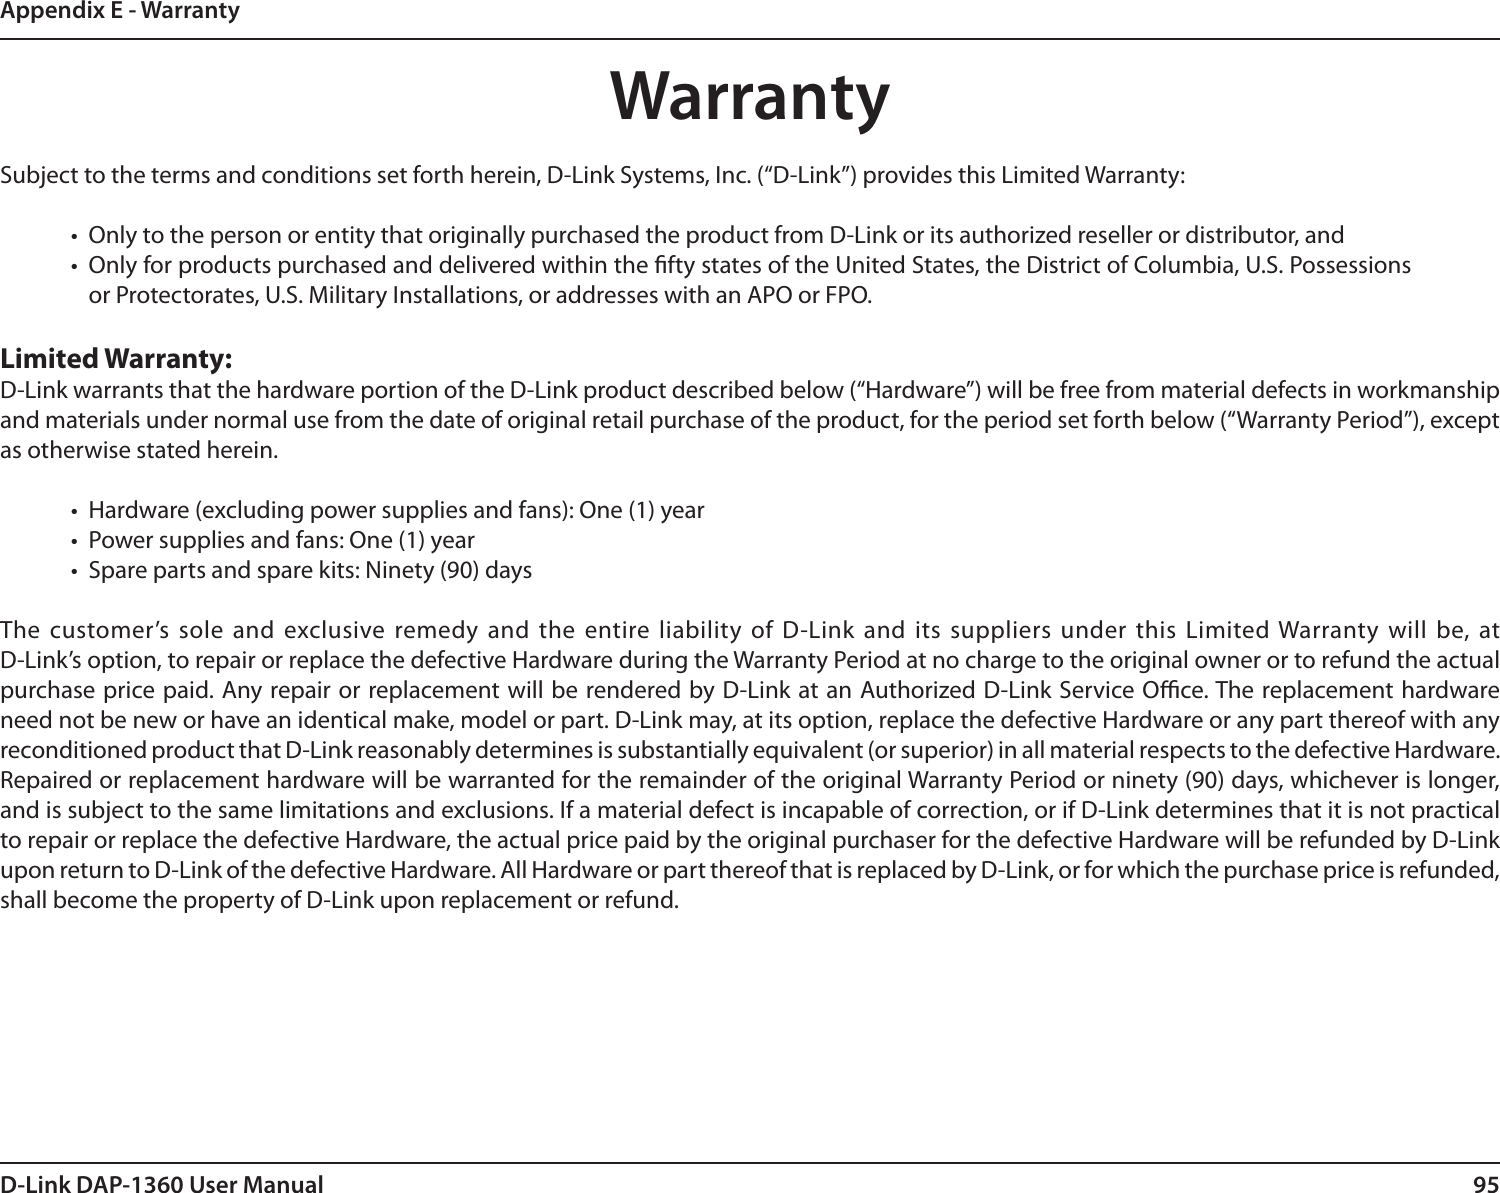 95D-Link DAP-1360 User ManualAppendix E - WarrantyWarrantySubject to the terms and conditions set forth herein, D-Link Systems, Inc. (“D-Link”) provides this Limited Warranty:•  Only to the person or entity that originally purchased the product from D-Link or its authorized reseller or distributor, and•  Only for products purchased and delivered within the fty states of the United States, the District of Columbia, U.S. Possessions or Protectorates, U.S. Military Installations, or addresses with an APO or FPO.Limited Warranty:D-Link warrants that the hardware portion of the D-Link product described below (“Hardware”) will be free from material defects in workmanship and materials under normal use from the date of original retail purchase of the product, for the period set forth below (“Warranty Period”), except as otherwise stated herein.•  Hardware (excluding power supplies and fans): One (1) year•  Power supplies and fans: One (1) year•  Spare parts and spare kits: Ninety (90) daysThe customer’s sole and  exclusive remedy and the entire liability of D-Link and  its suppliers under this  Limited Warranty will be, at  D-Link’s option, to repair or replace the defective Hardware during the Warranty Period at no charge to the original owner or to refund the actual purchase price paid. Any repair or replacement will be rendered by D-Link at an Authorized D-Link Service Oce. The replacement hardware need not be new or have an identical make, model or part. D-Link may, at its option, replace the defective Hardware or any part thereof with any reconditioned product that D-Link reasonably determines is substantially equivalent (or superior) in all material respects to the defective Hardware. Repaired or replacement hardware will be warranted for the remainder of the original Warranty Period or ninety (90) days, whichever is longer, and is subject to the same limitations and exclusions. If a material defect is incapable of correction, or if D-Link determines that it is not practical to repair or replace the defective Hardware, the actual price paid by the original purchaser for the defective Hardware will be refunded by D-Link upon return to D-Link of the defective Hardware. All Hardware or part thereof that is replaced by D-Link, or for which the purchase price is refunded, shall become the property of D-Link upon replacement or refund.